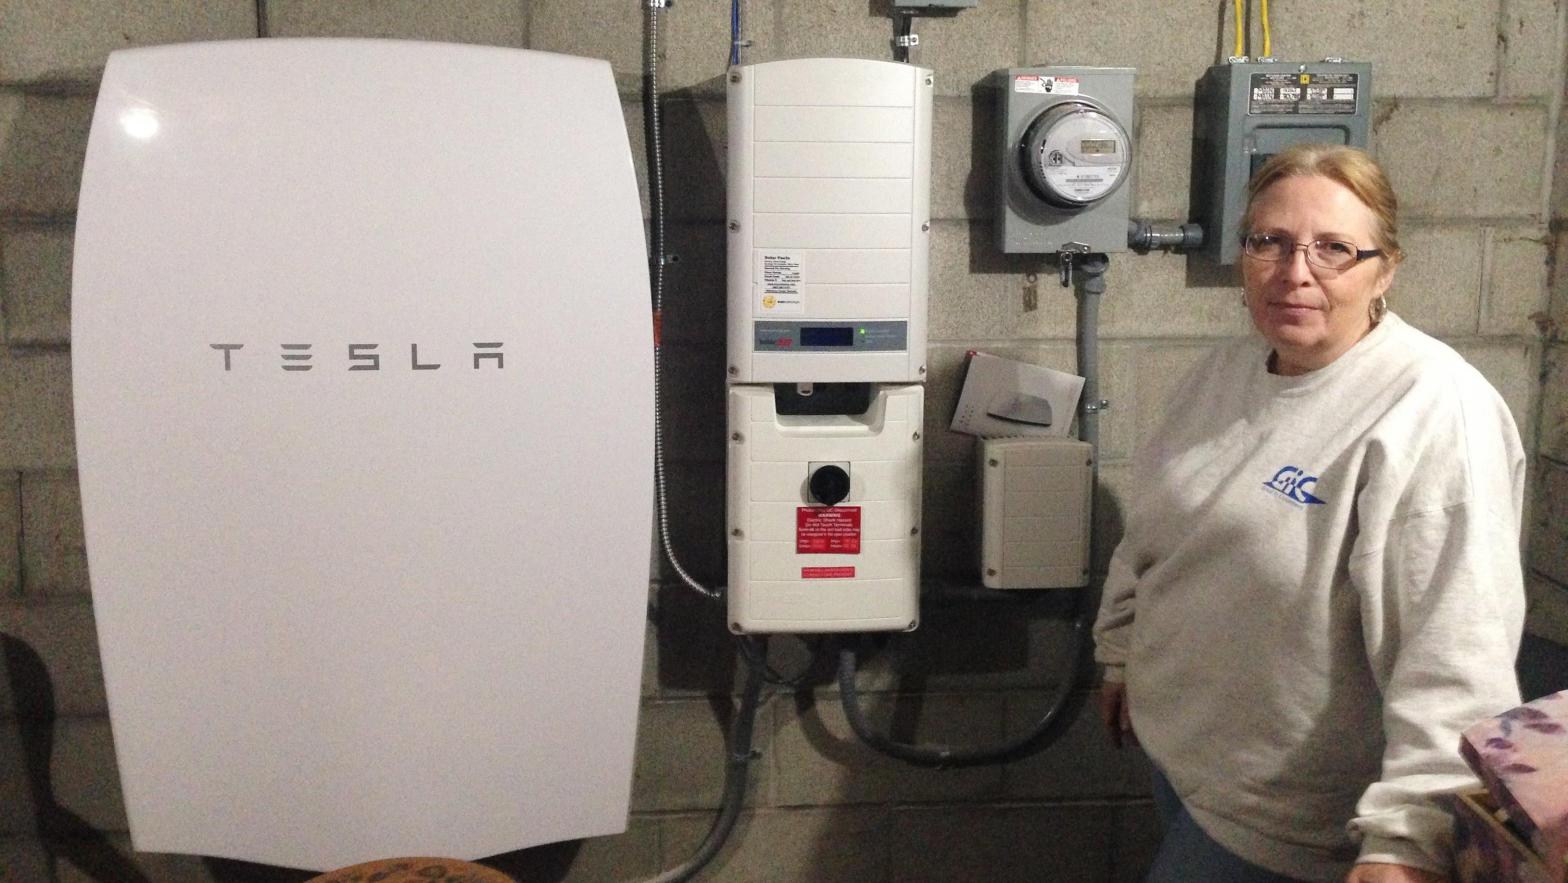 A customer in Vermont stands next to a Tesla Powerwall battery and inverter which she uses to store solar energy. (Photo: Dave Gram, AP)